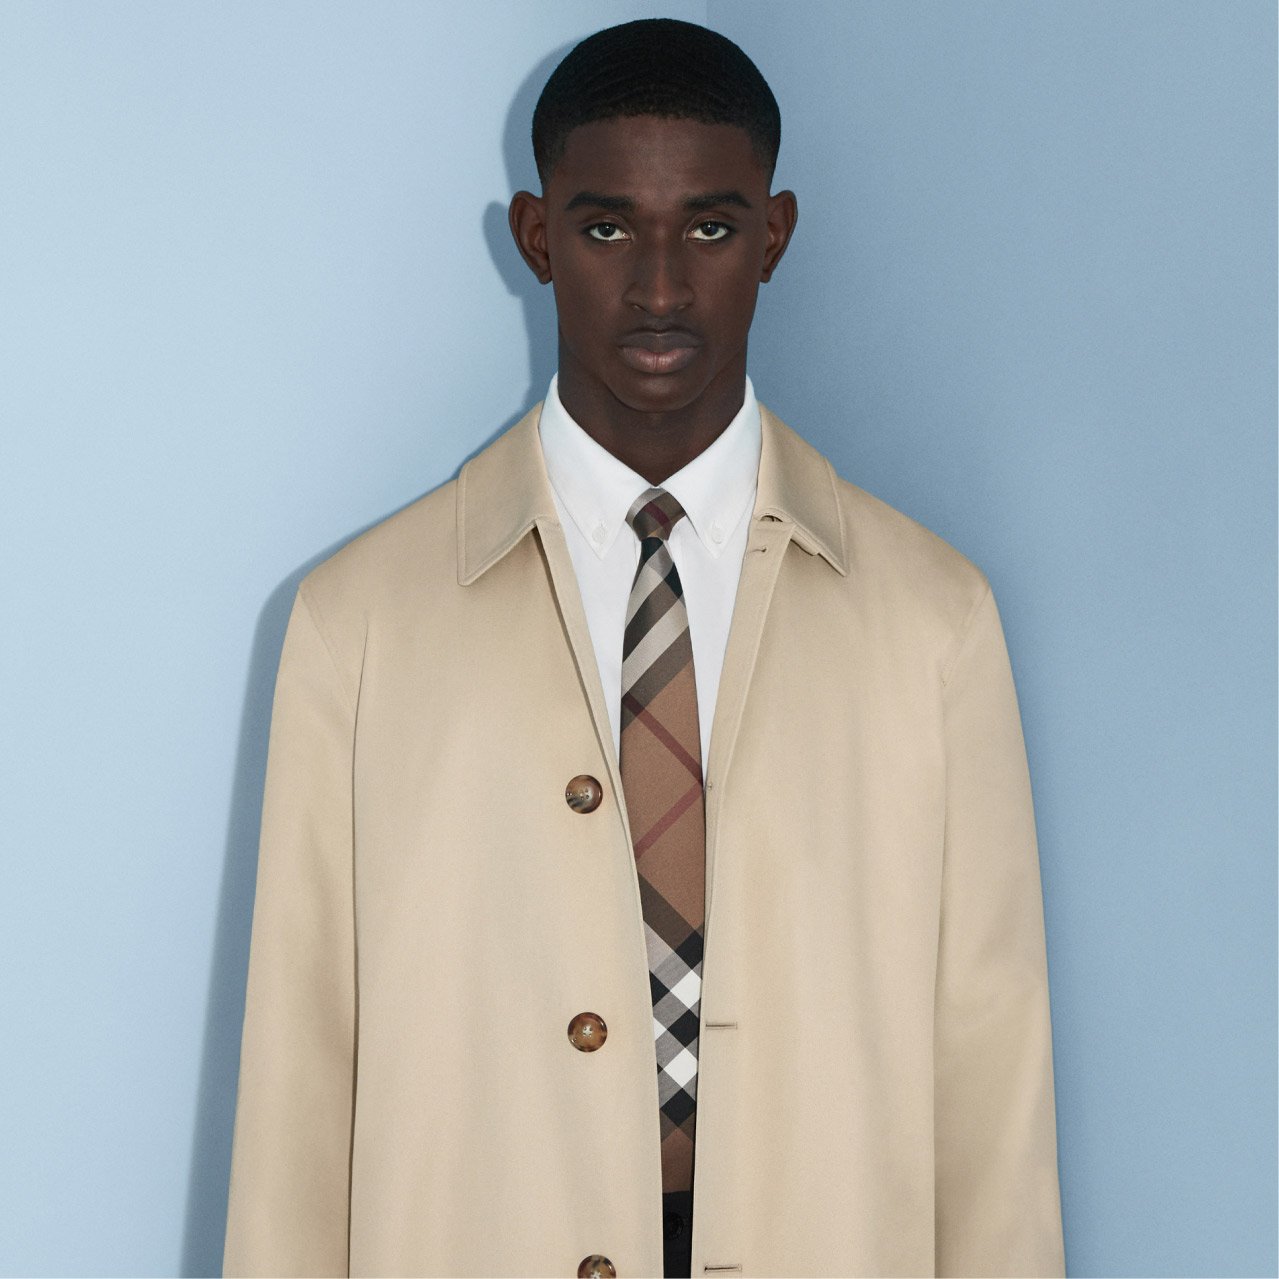 Burberry 3939 IH-35 South, San Marcos | Burberry® Official